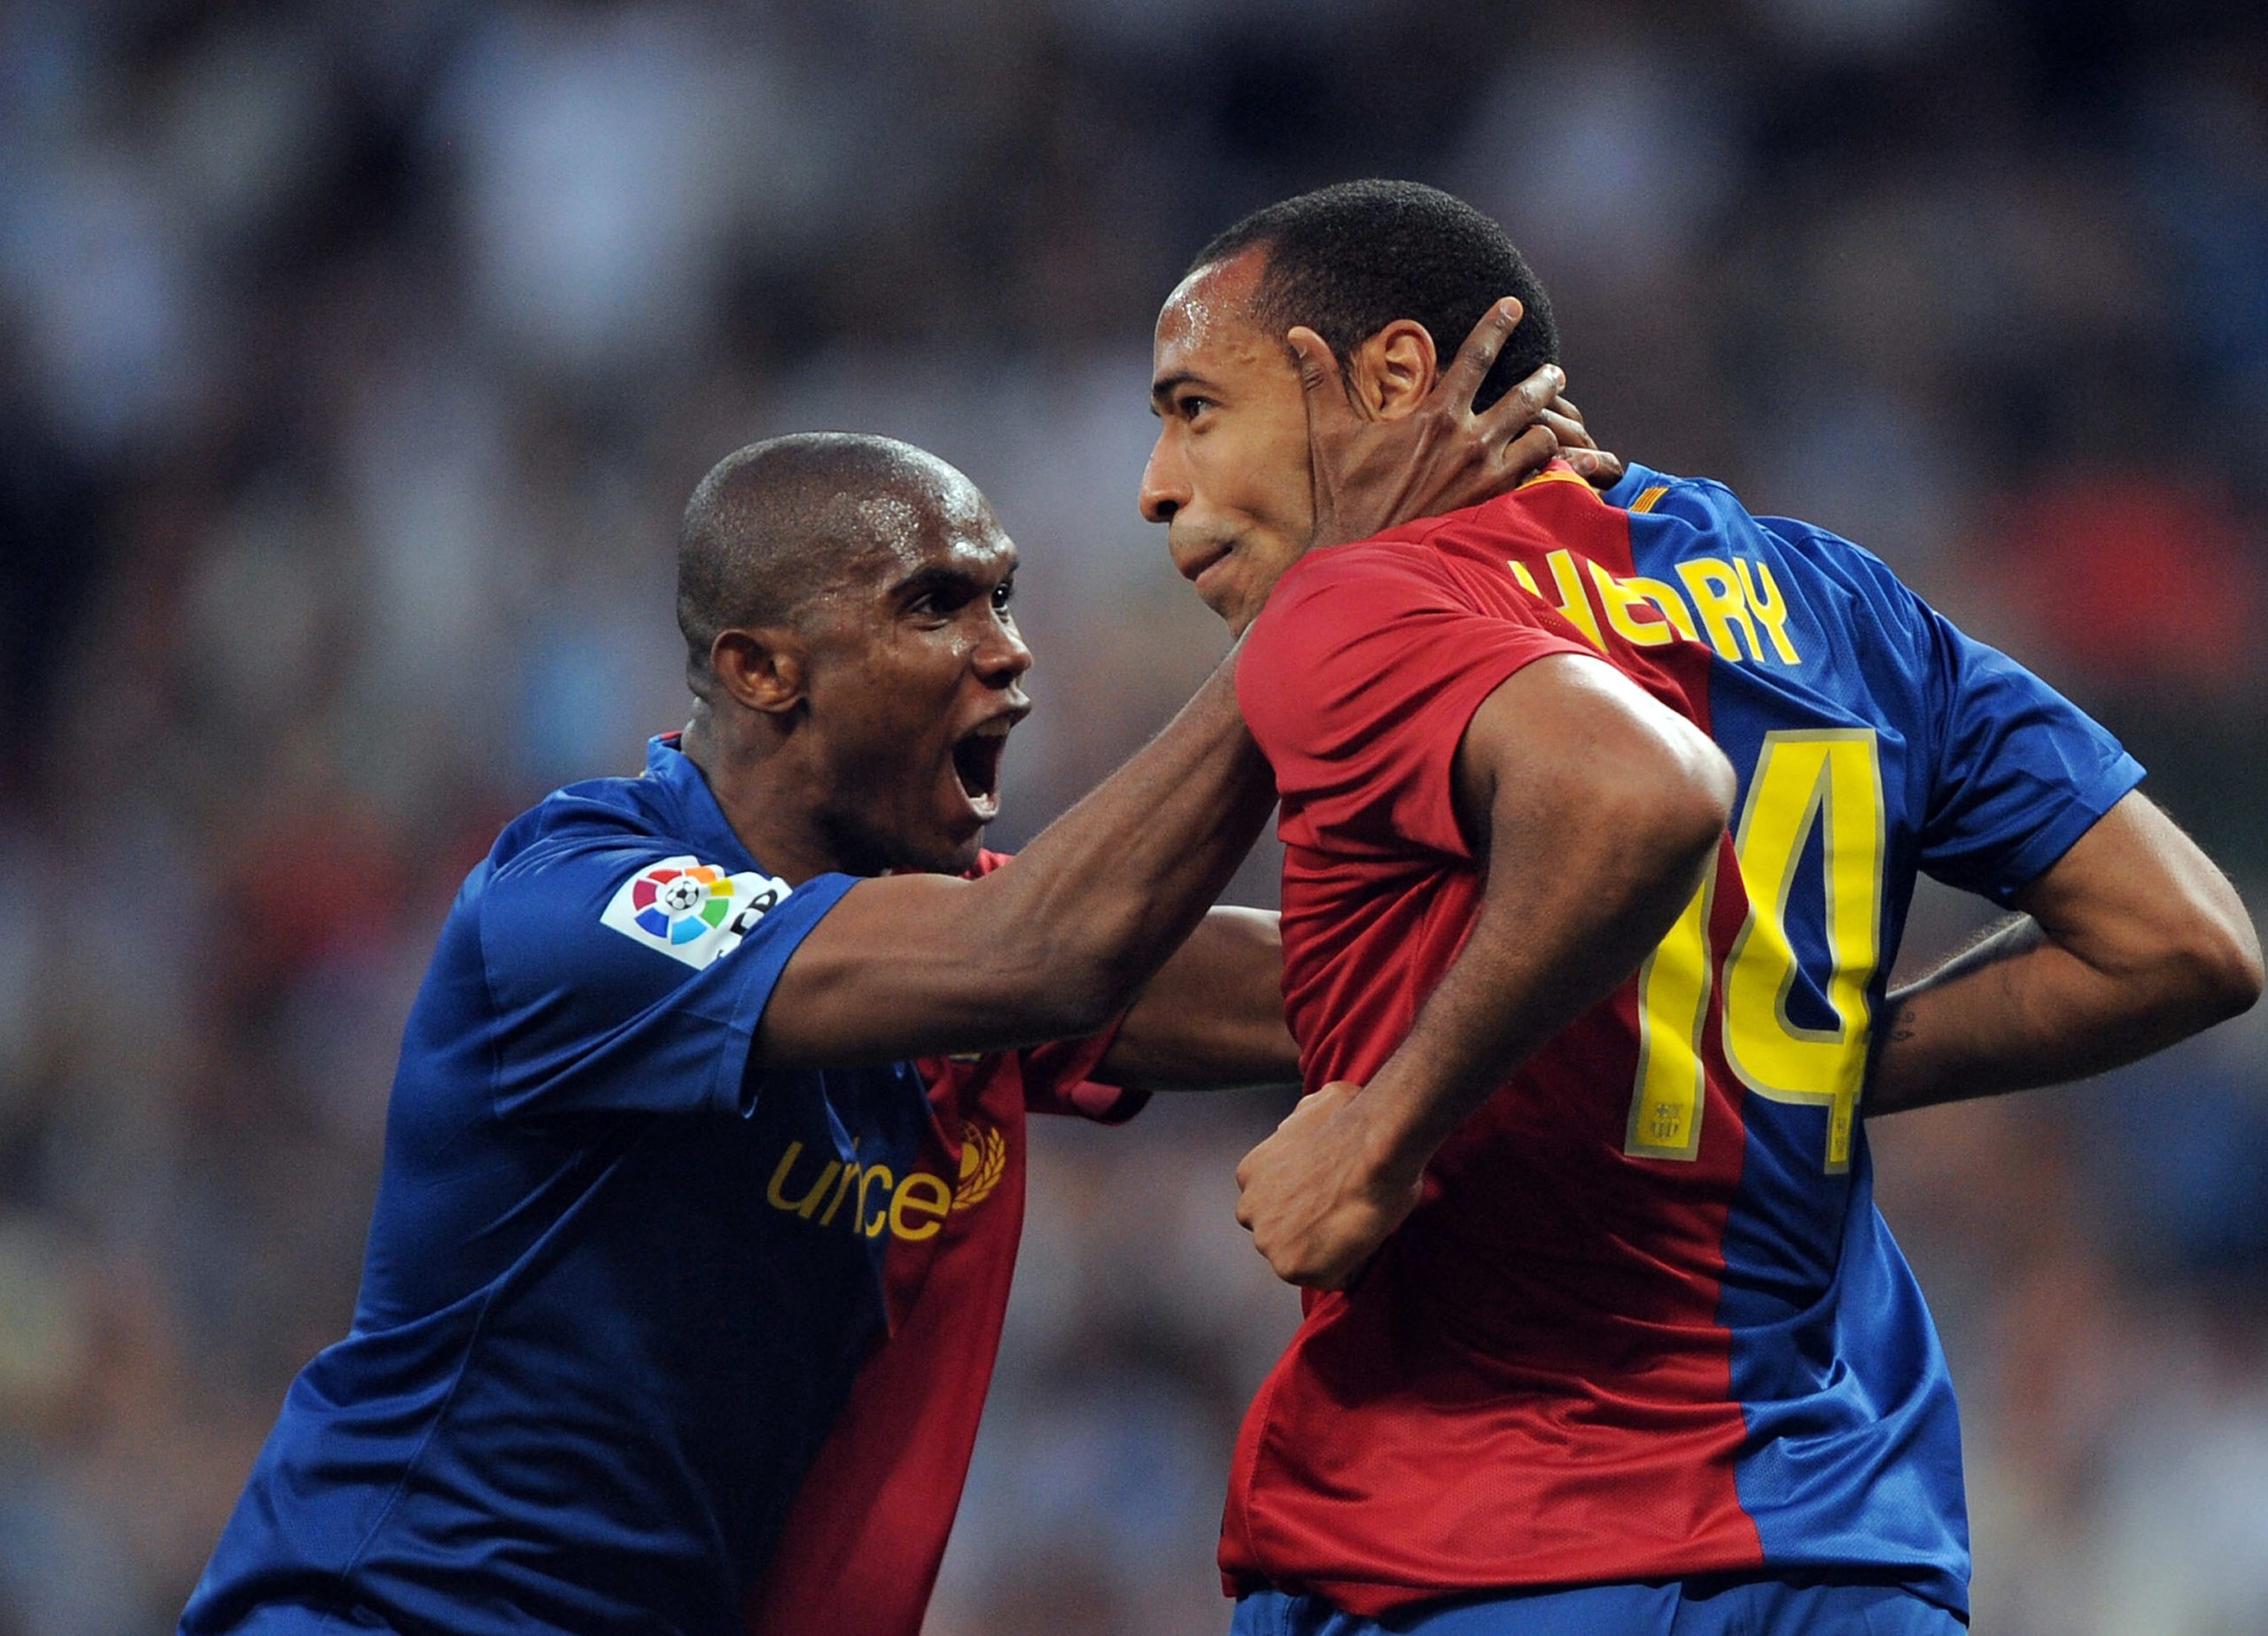 MADRID, SPAIN: Thierry Henry (R) of Barcelona celebrates with Samuel Eto'o after scoring Barcelona's fourth goal during the La Liga match between Real Madrid and Barcelona at the Santiago Bernabeu stadium on May 2, 2009. (Photo by Denis Doyle/Getty Images)